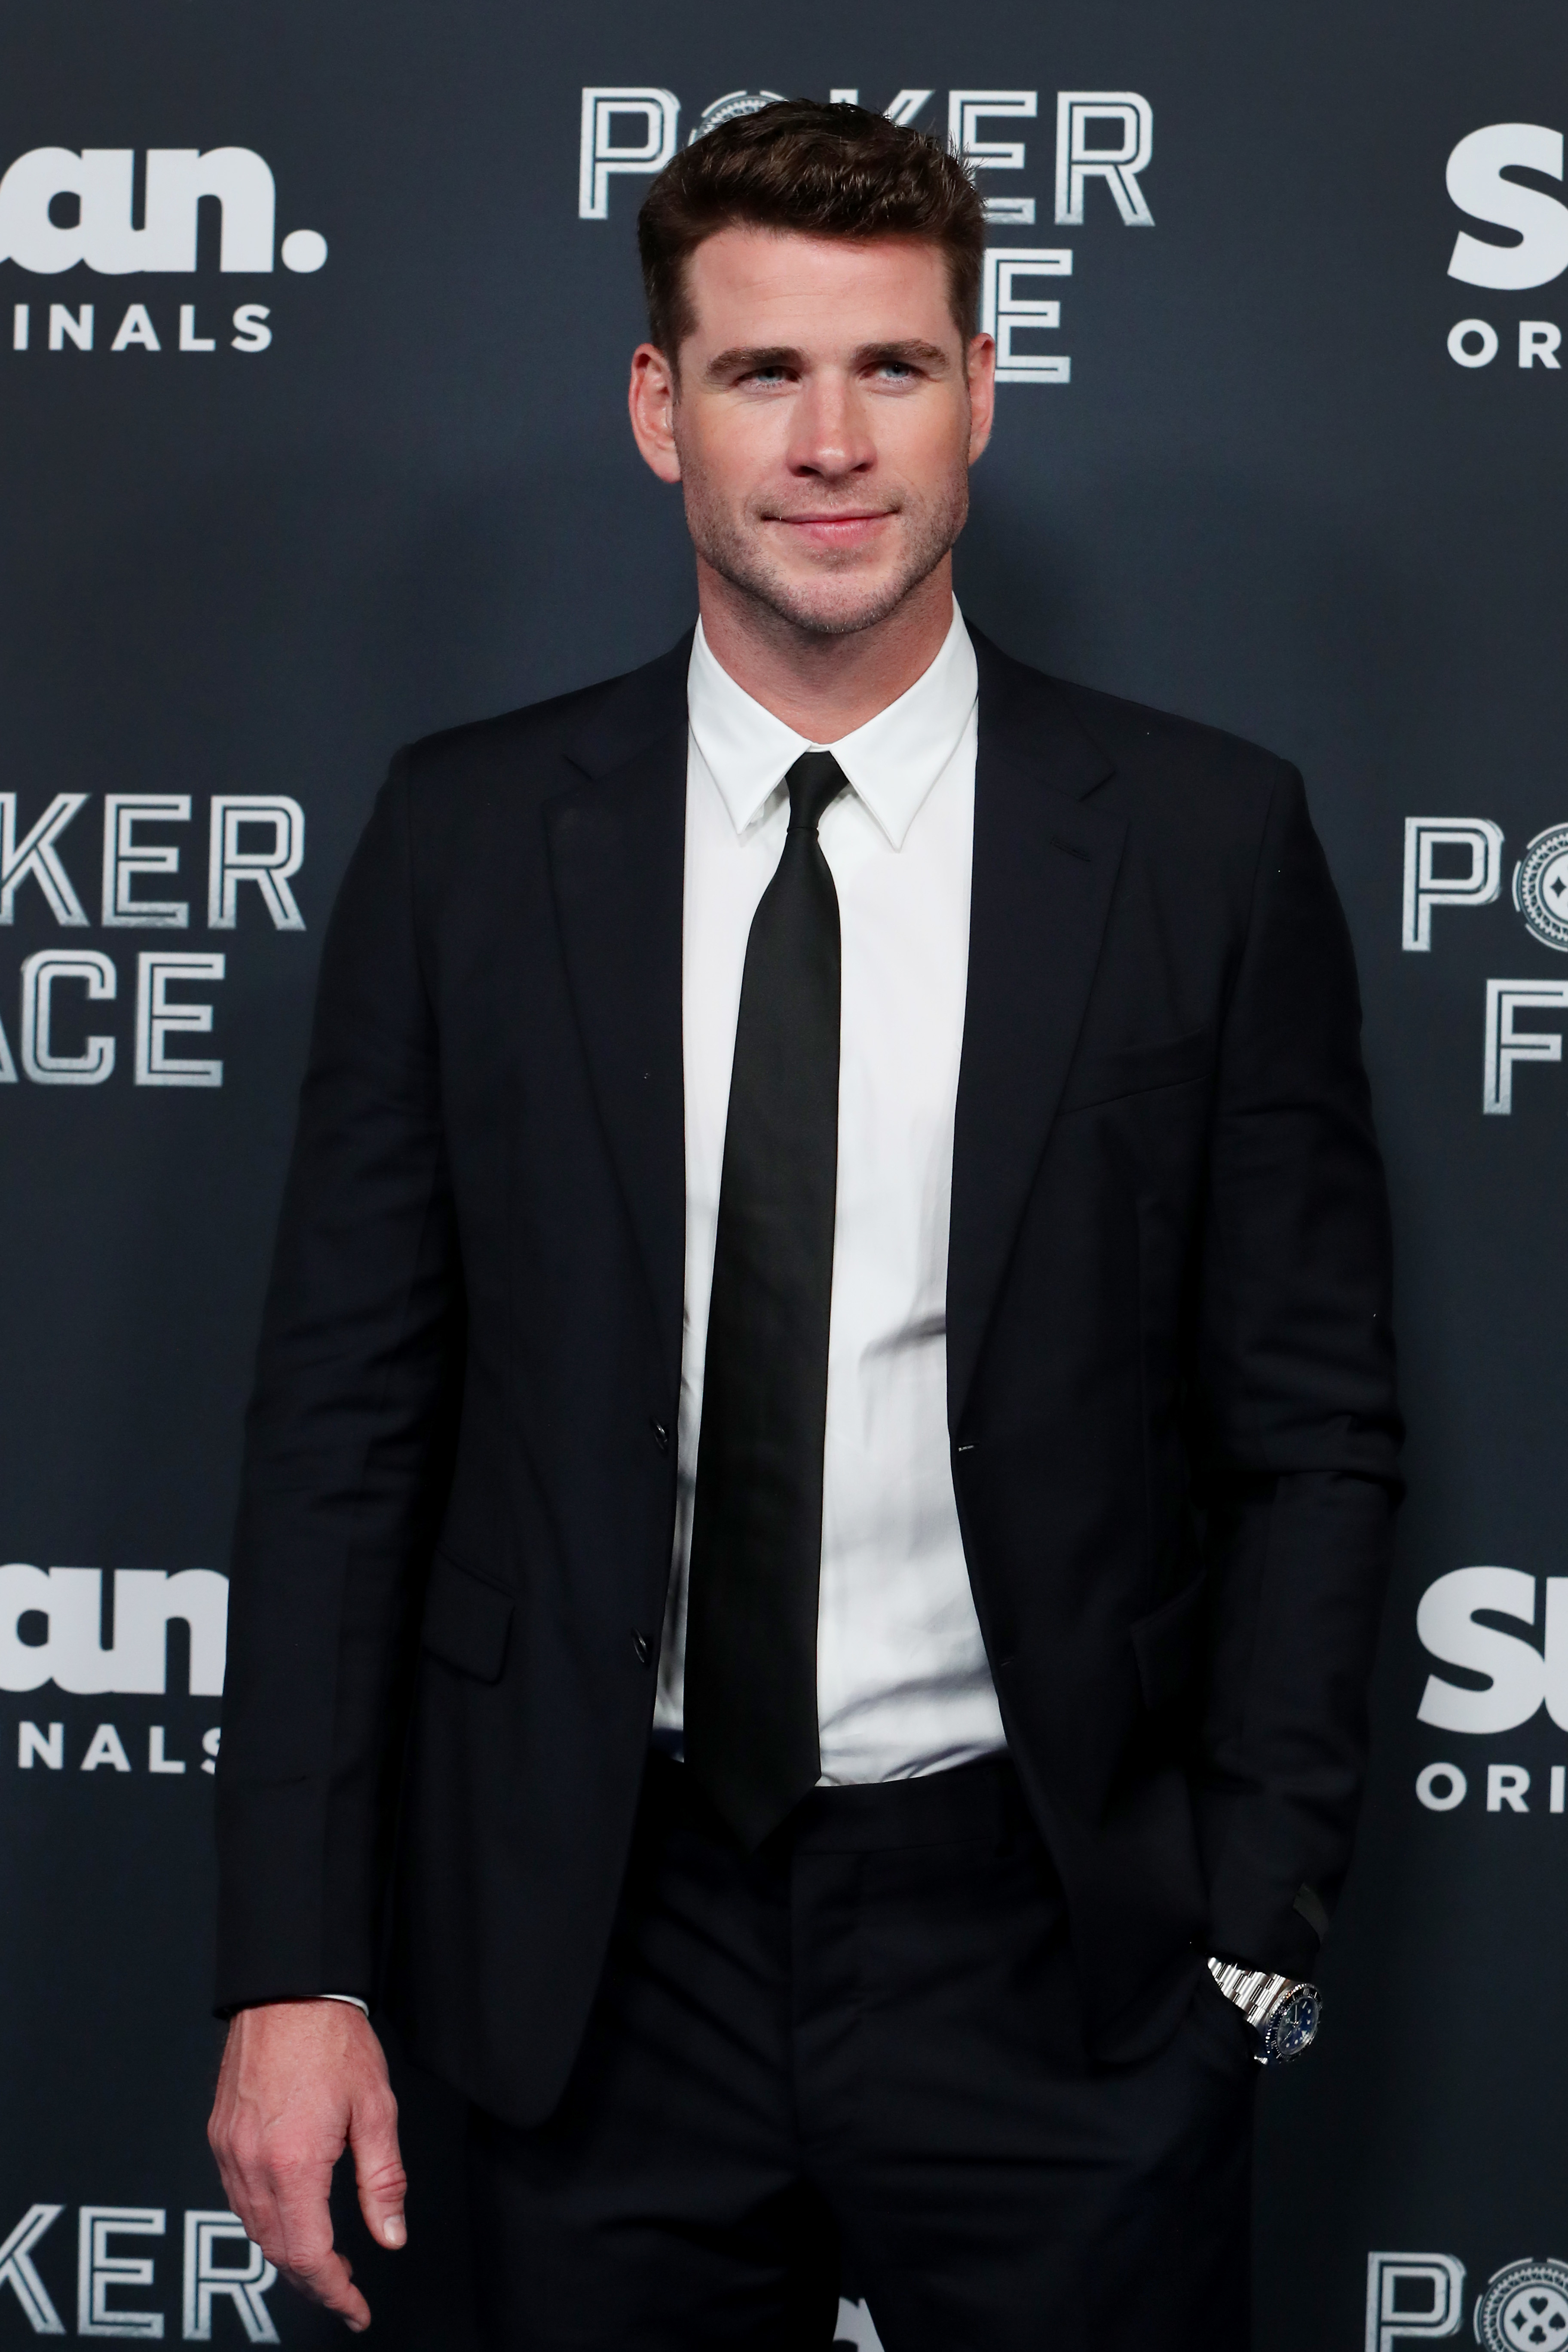 Liam Hemsworth at a &quot;Poker Face&quot; event, dressed in a classic black suit with a white shirt and black tie, posing in front of the event&#x27;s step-and-repeat backdrop